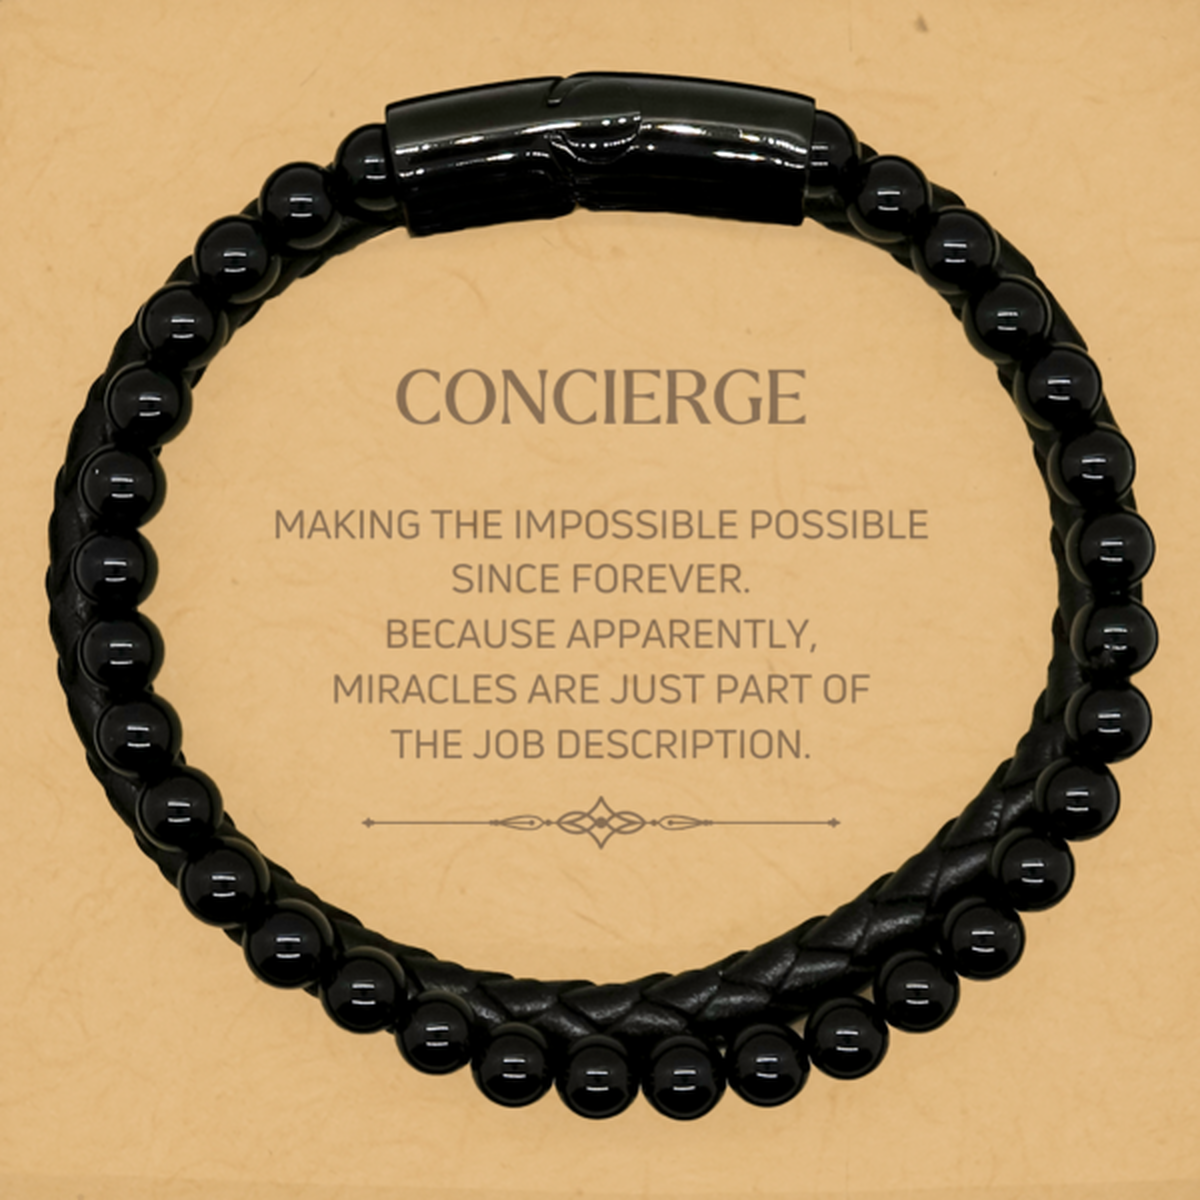 Funny Concierge Gifts, Miracles are just part of the job description, Inspirational Birthday Stone Leather Bracelets For Concierge, Men, Women, Coworkers, Friends, Boss